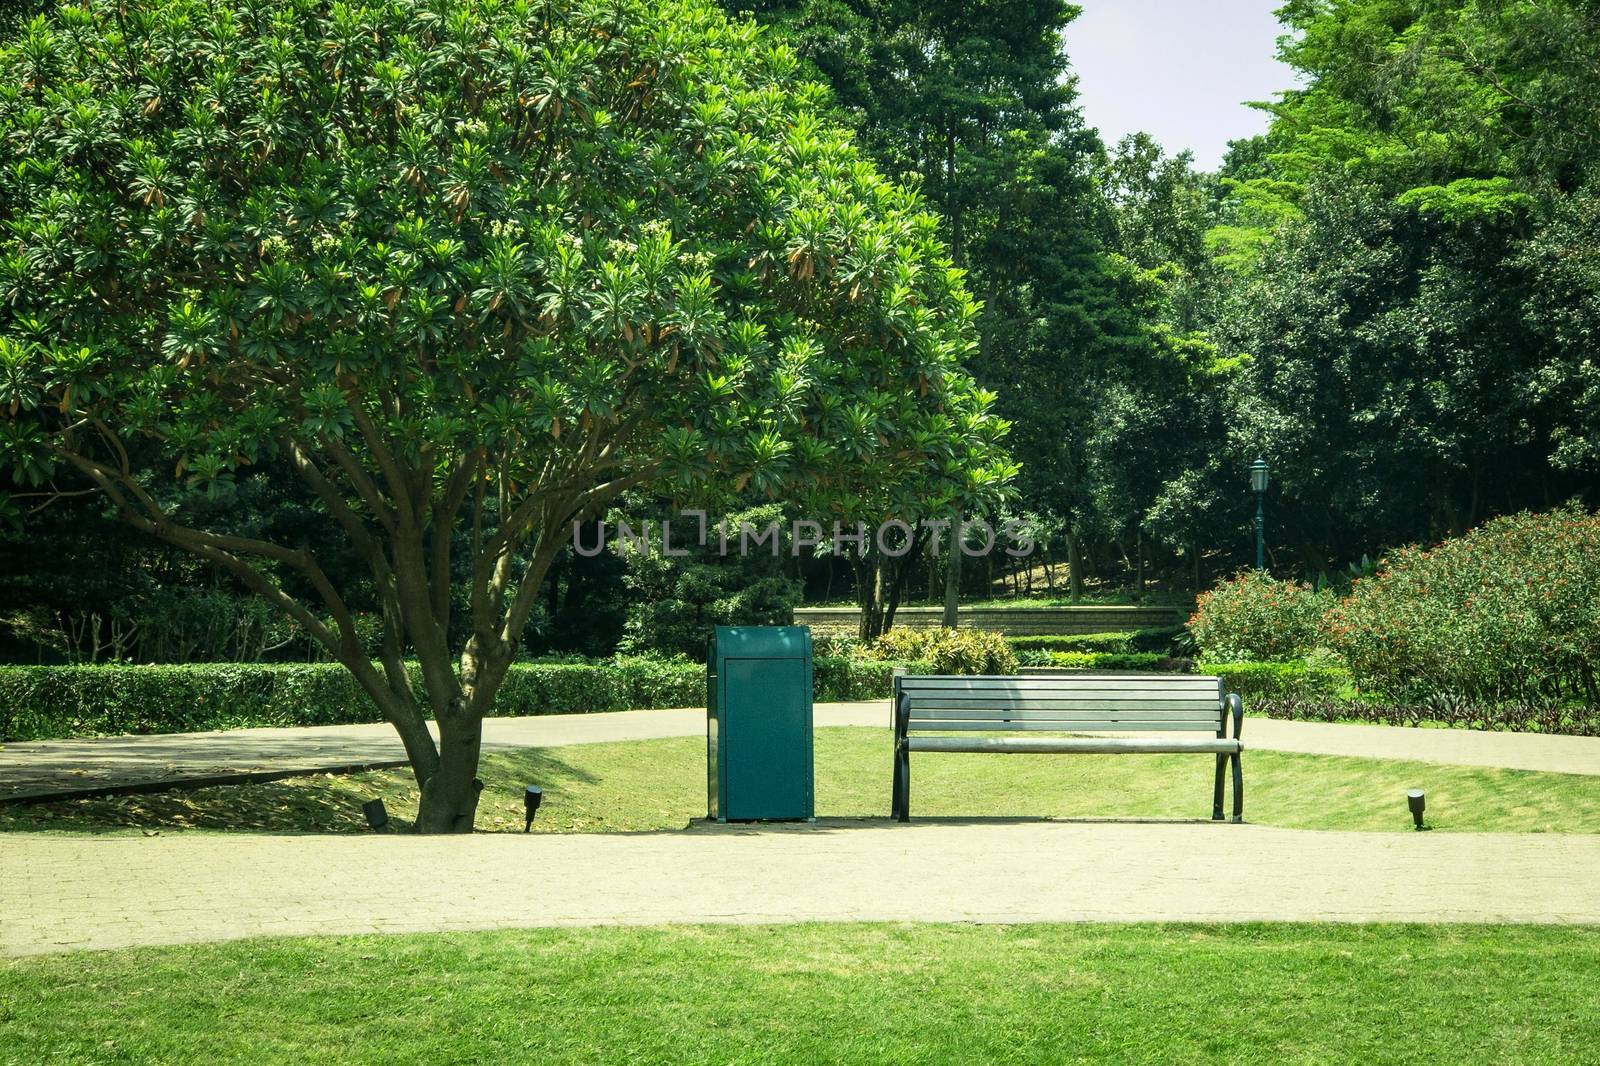 Green tree, plants and wooden bench in the public park